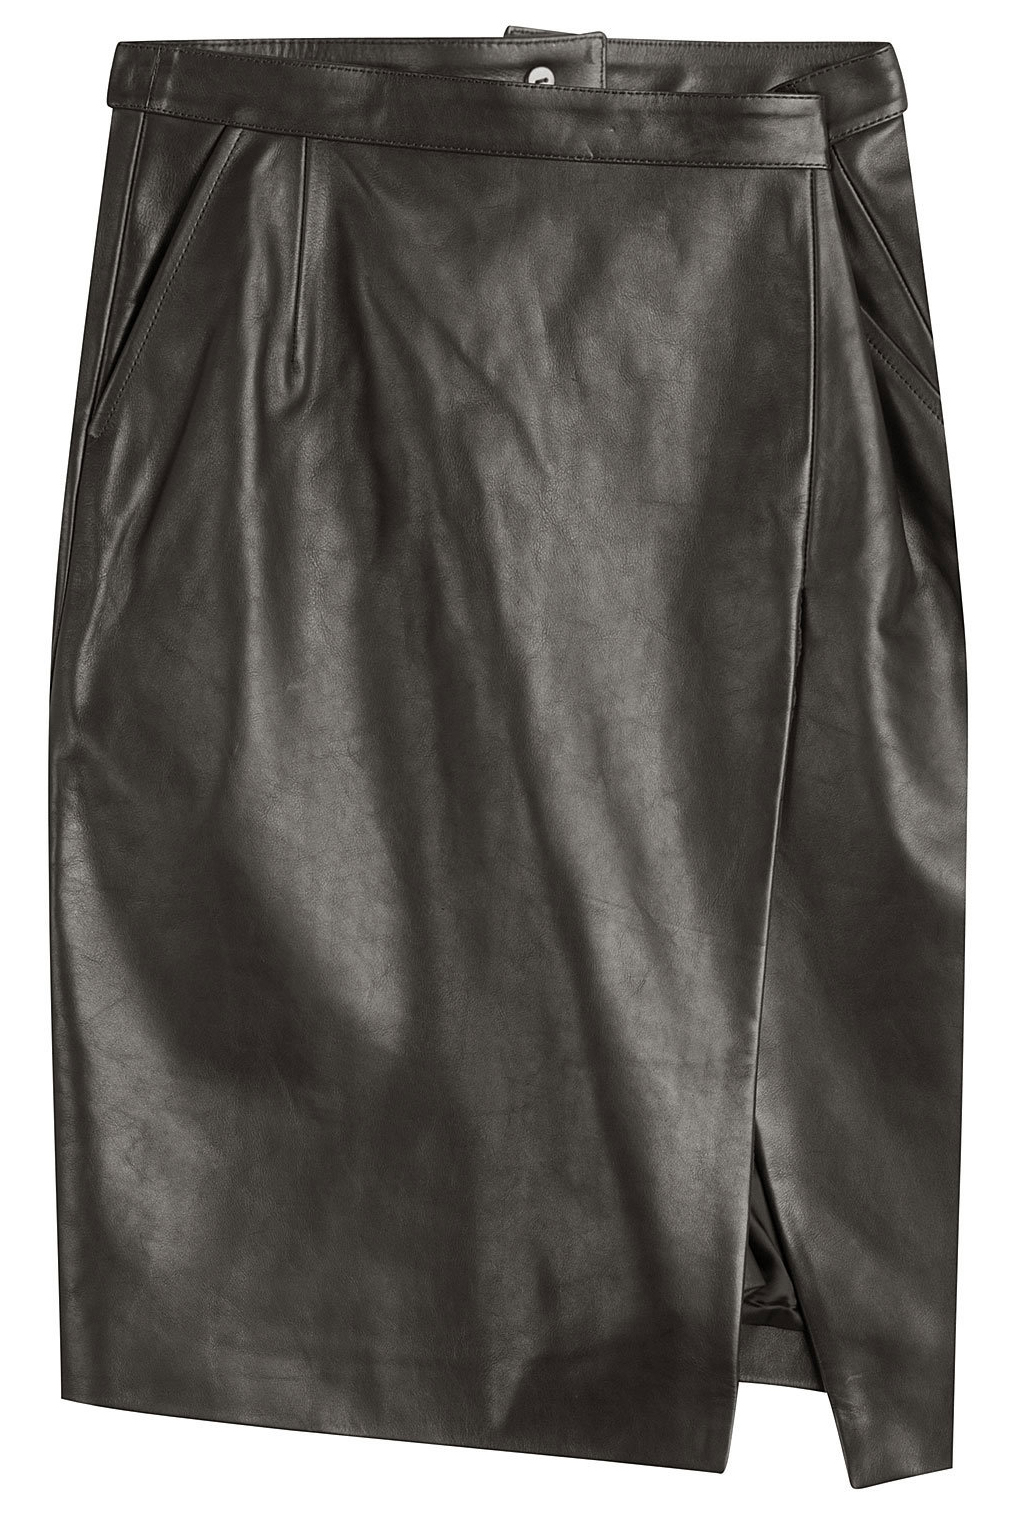 Vetements black leather skirt with front slit and asymmetric hemline 1599